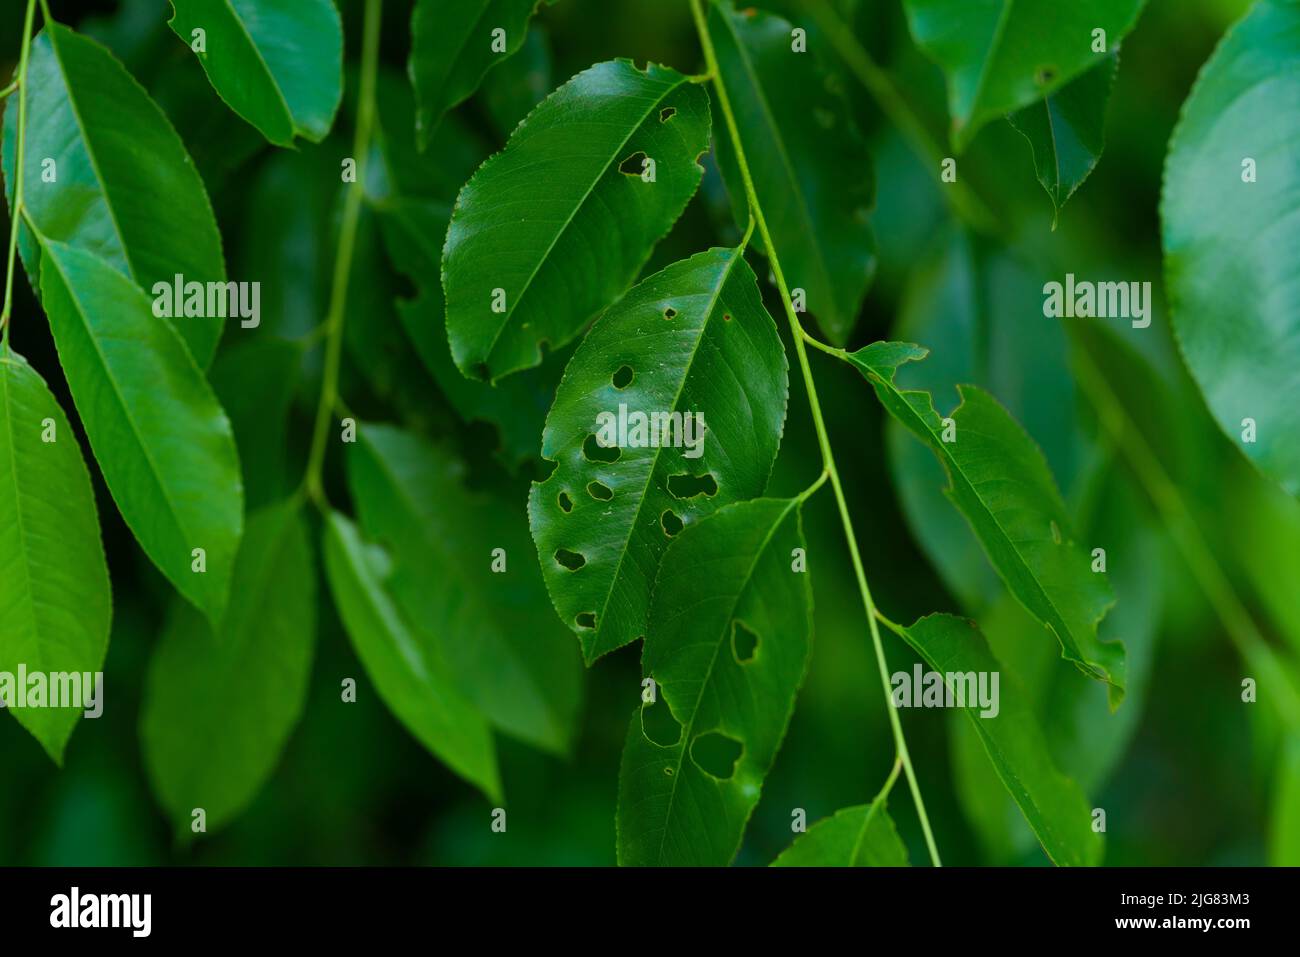 green tree leaves with holes in summer Stock Photo